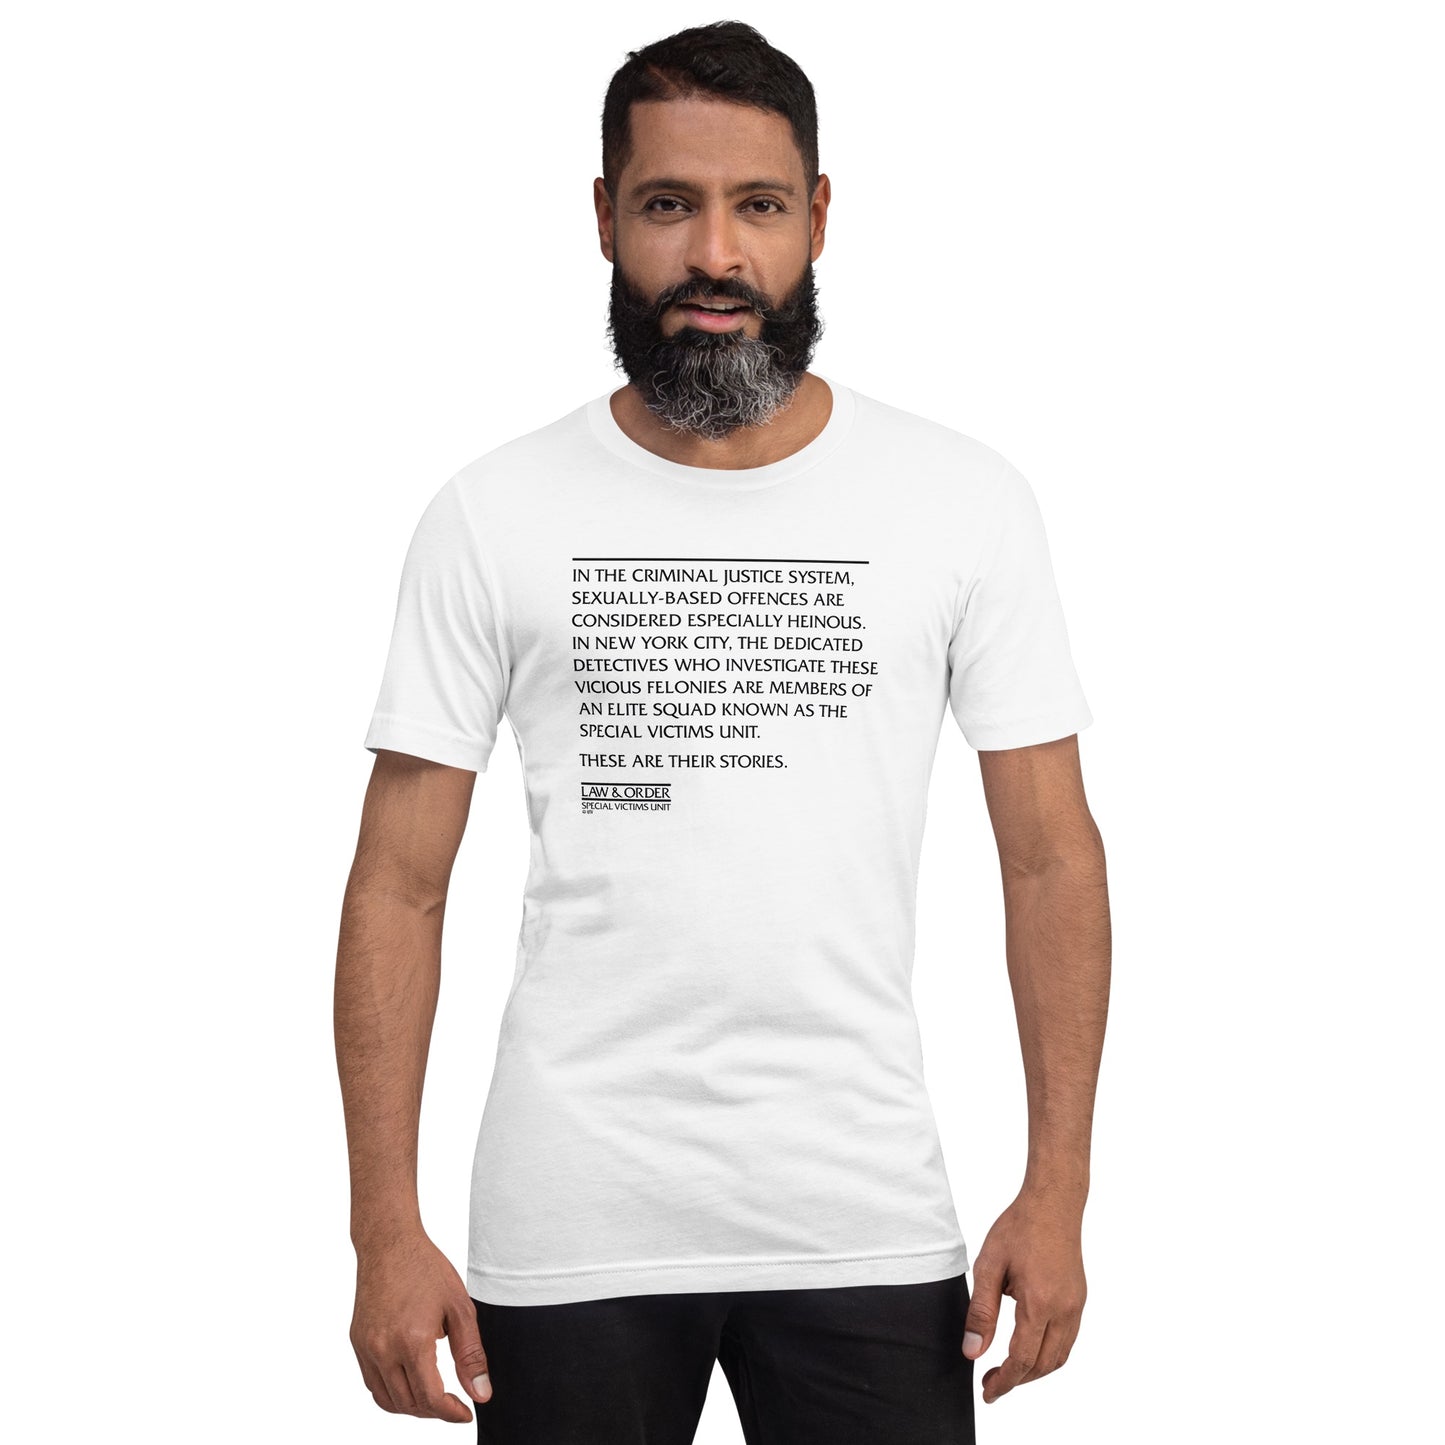 Law & Order Criminal Justice System Quote Adult Short Sleeve T-Shirt